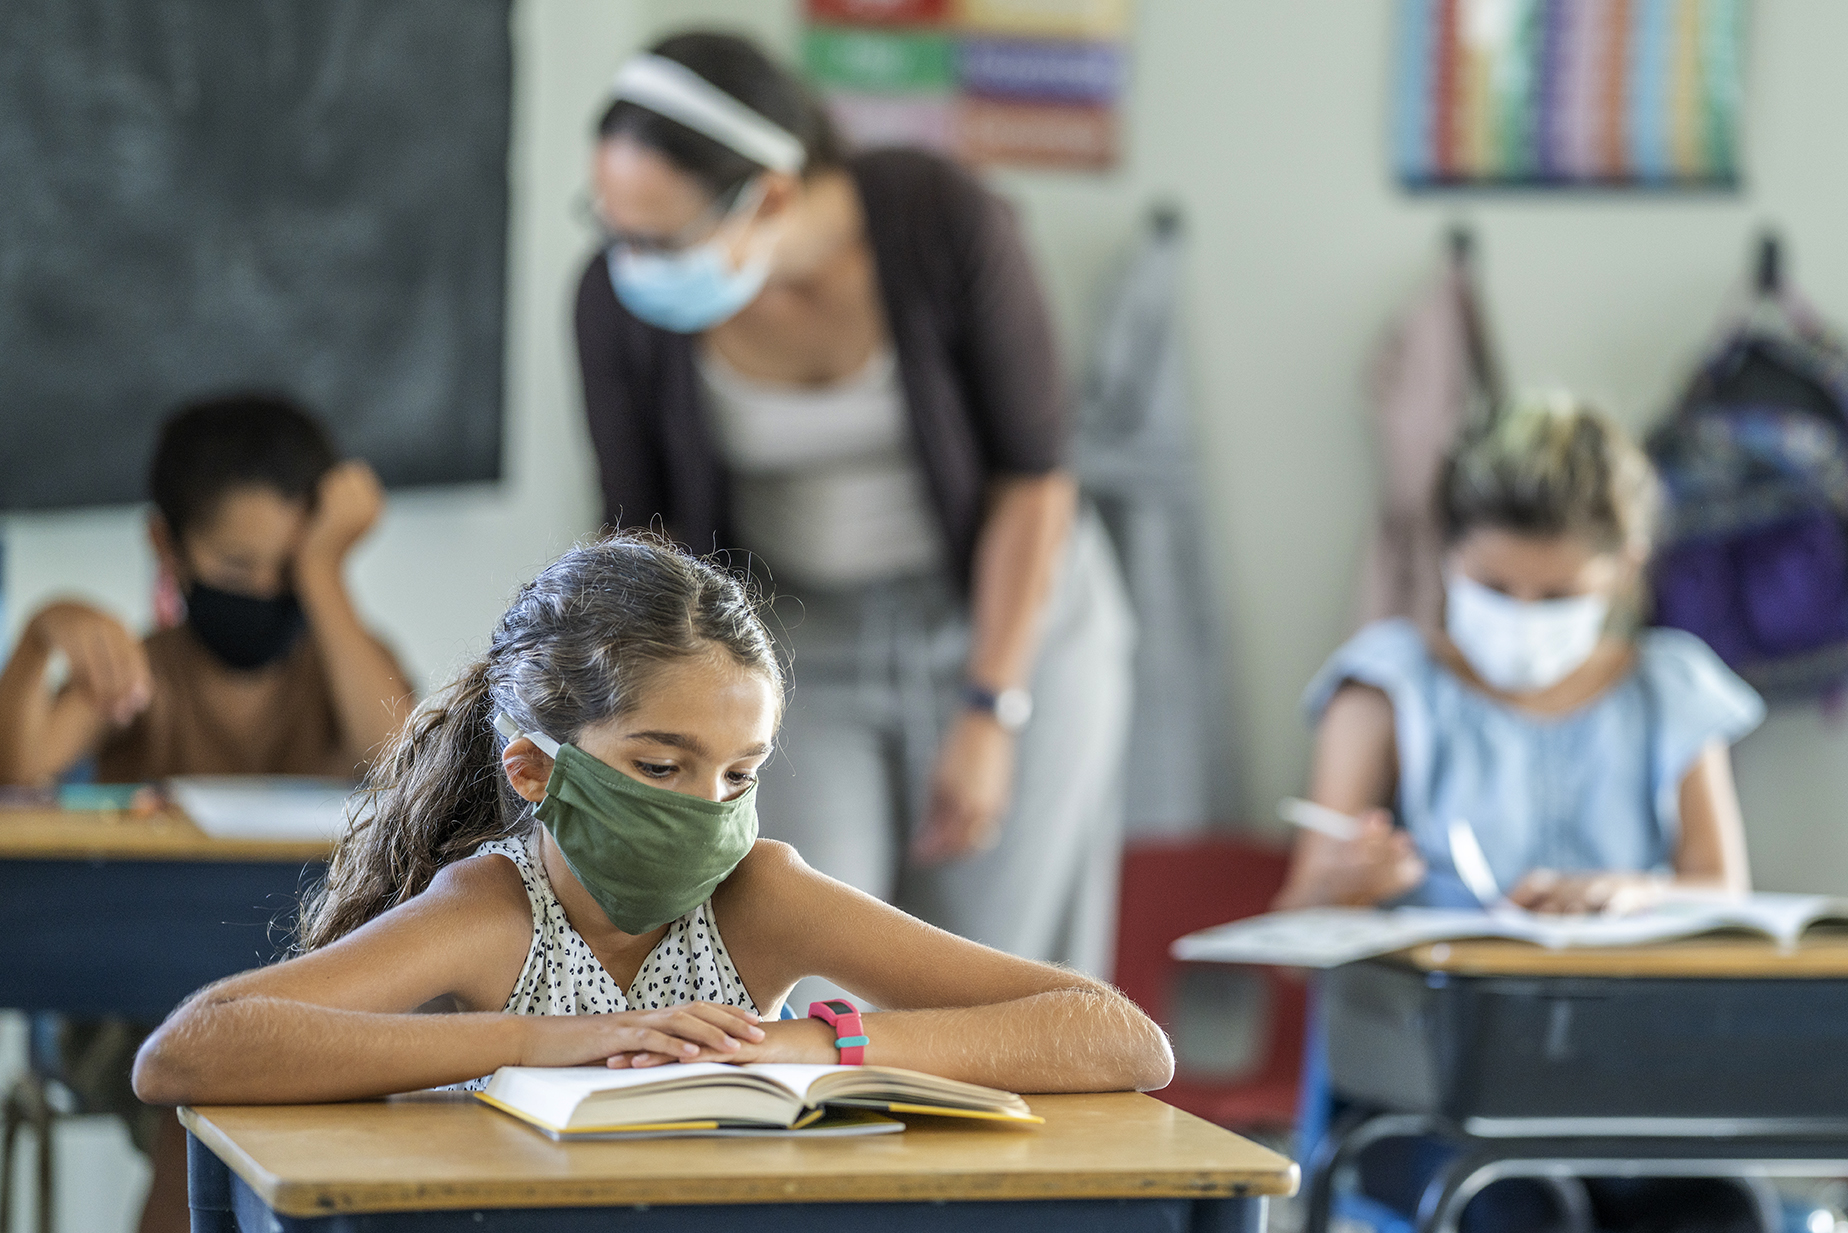 12 year old girl wearing a reusable, protective face mask in classroom while working on school work at her desk.